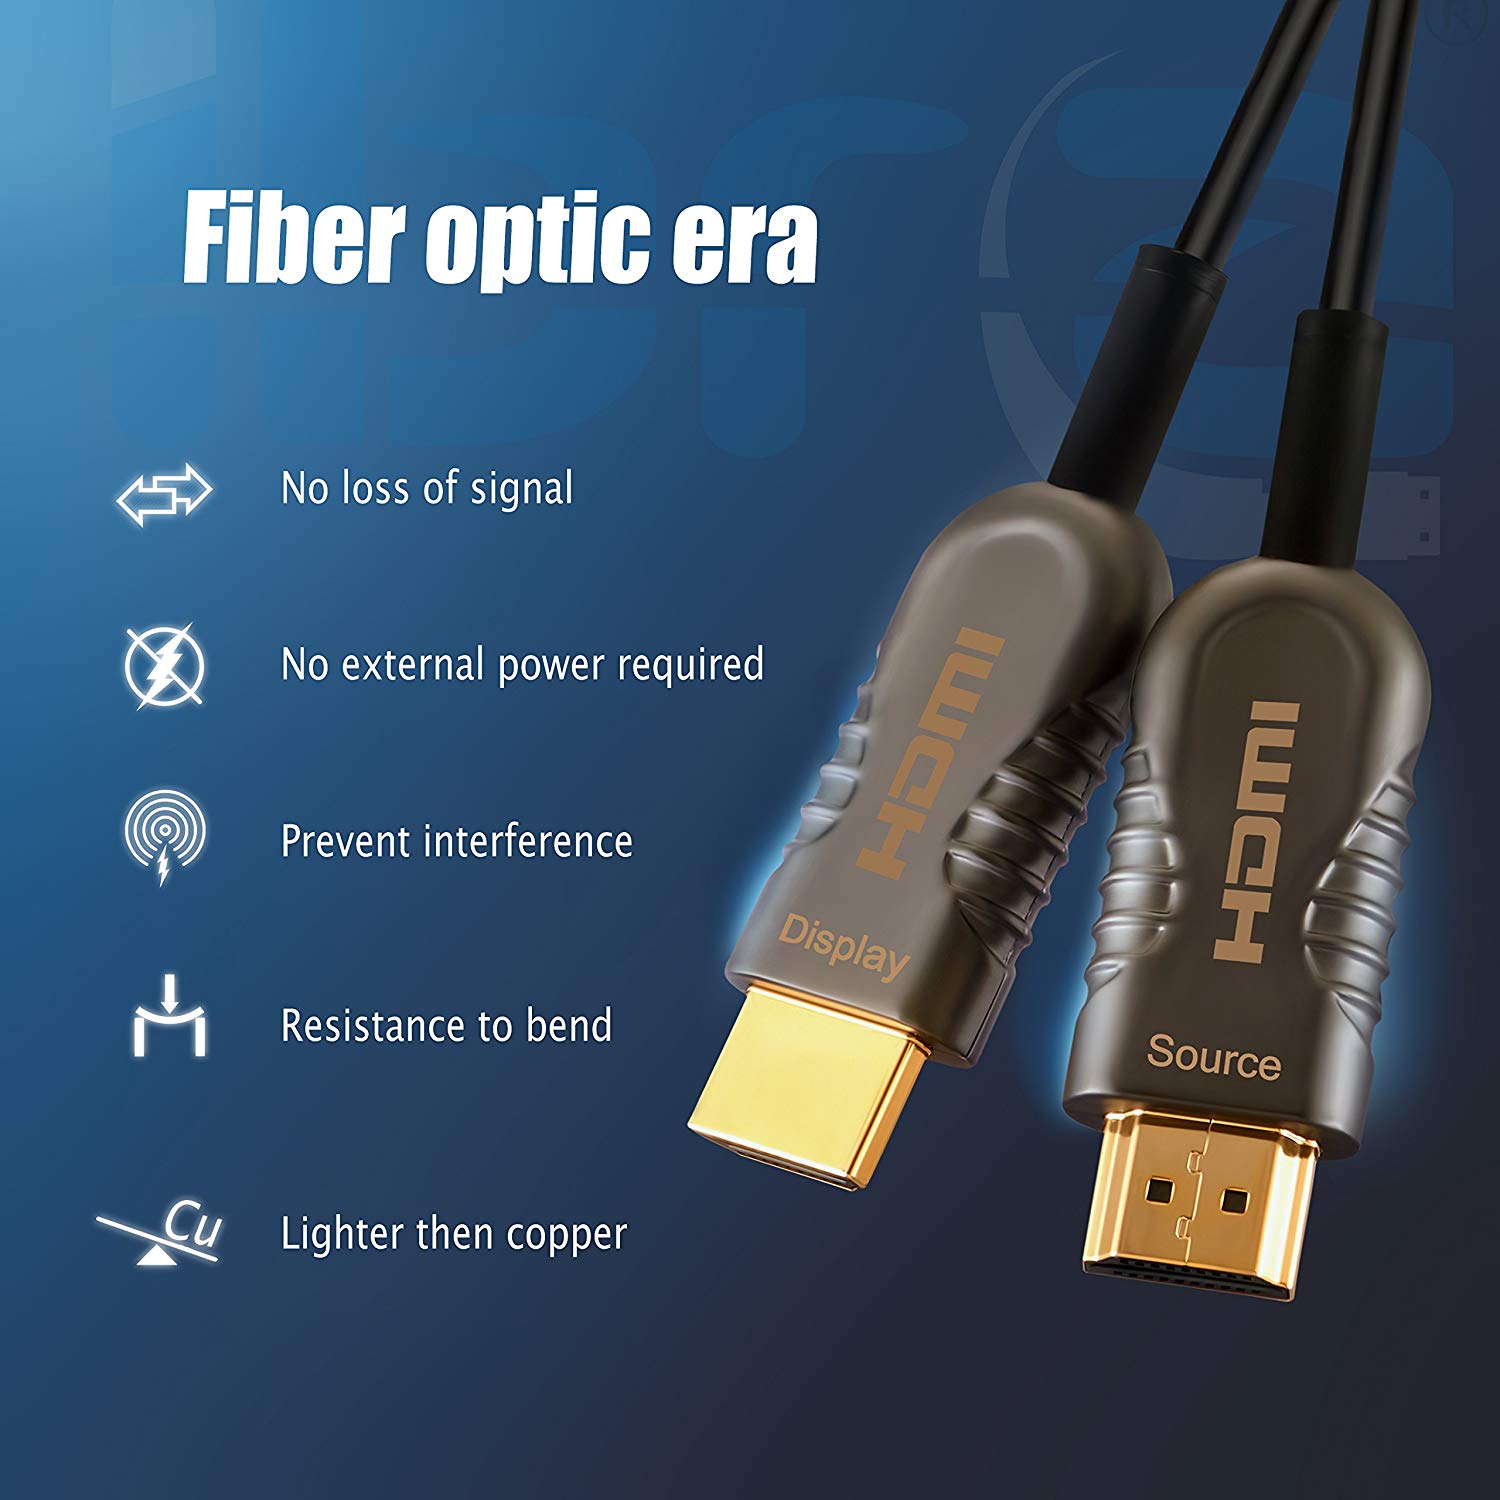 10M Fiber Optic HDMI High Speed Cable v2.0 18Gbps HDMI Lead Support 4K@60Hz/4:4:4/3D/4K HDR HDCP 2.2 for Apple TV, HDTV, Roku TV Box, Xbox One X, Home Theater, PS4, PS3 etc - IBRA OPTICAL HDMI Cable